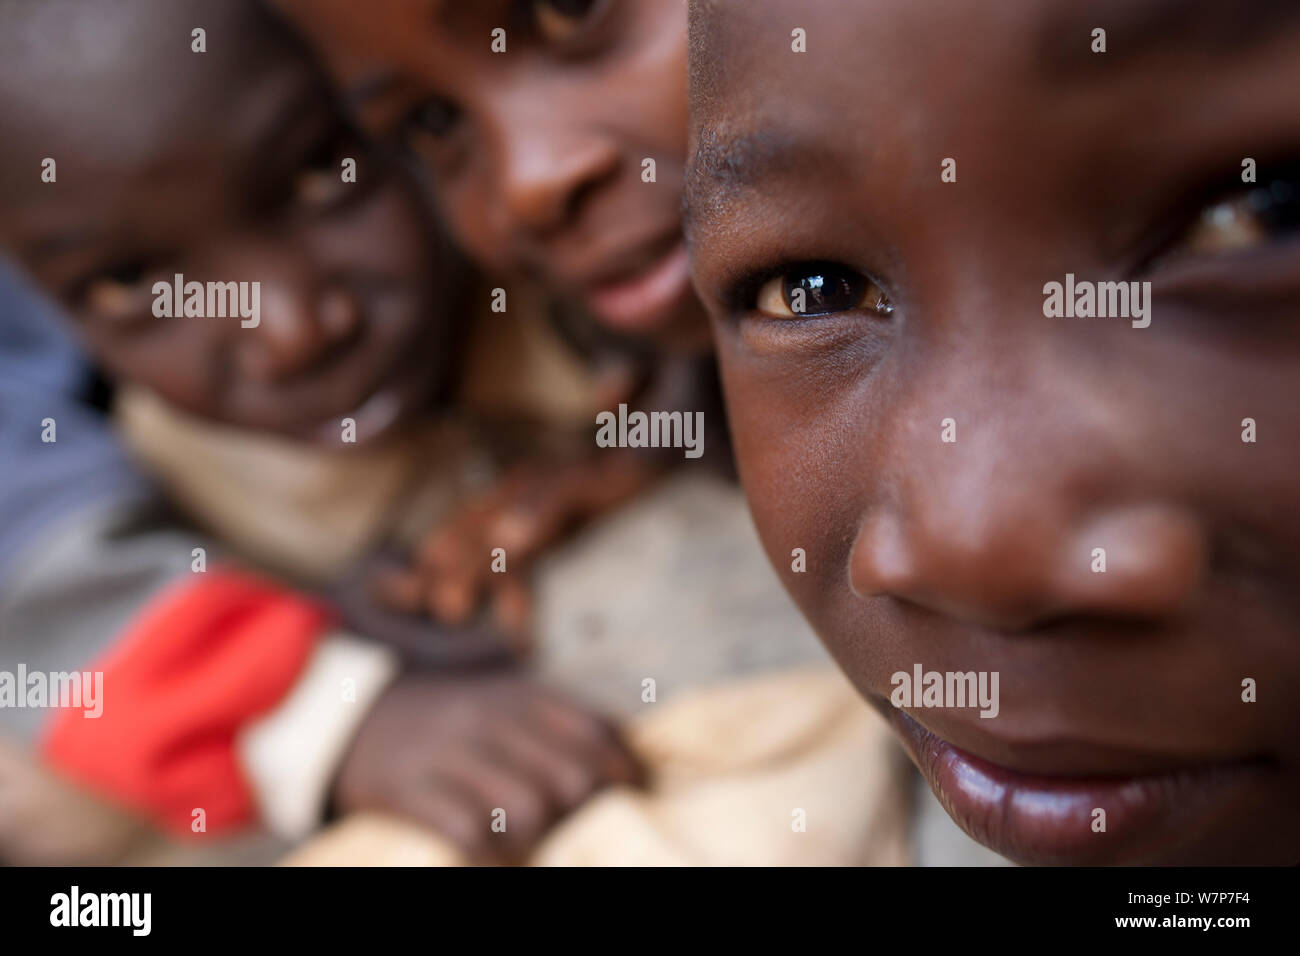 Mozambican children close up interested in camera. Pemba to Montepuez highway, north-eastern Mozambique, November 2011. Stock Photo